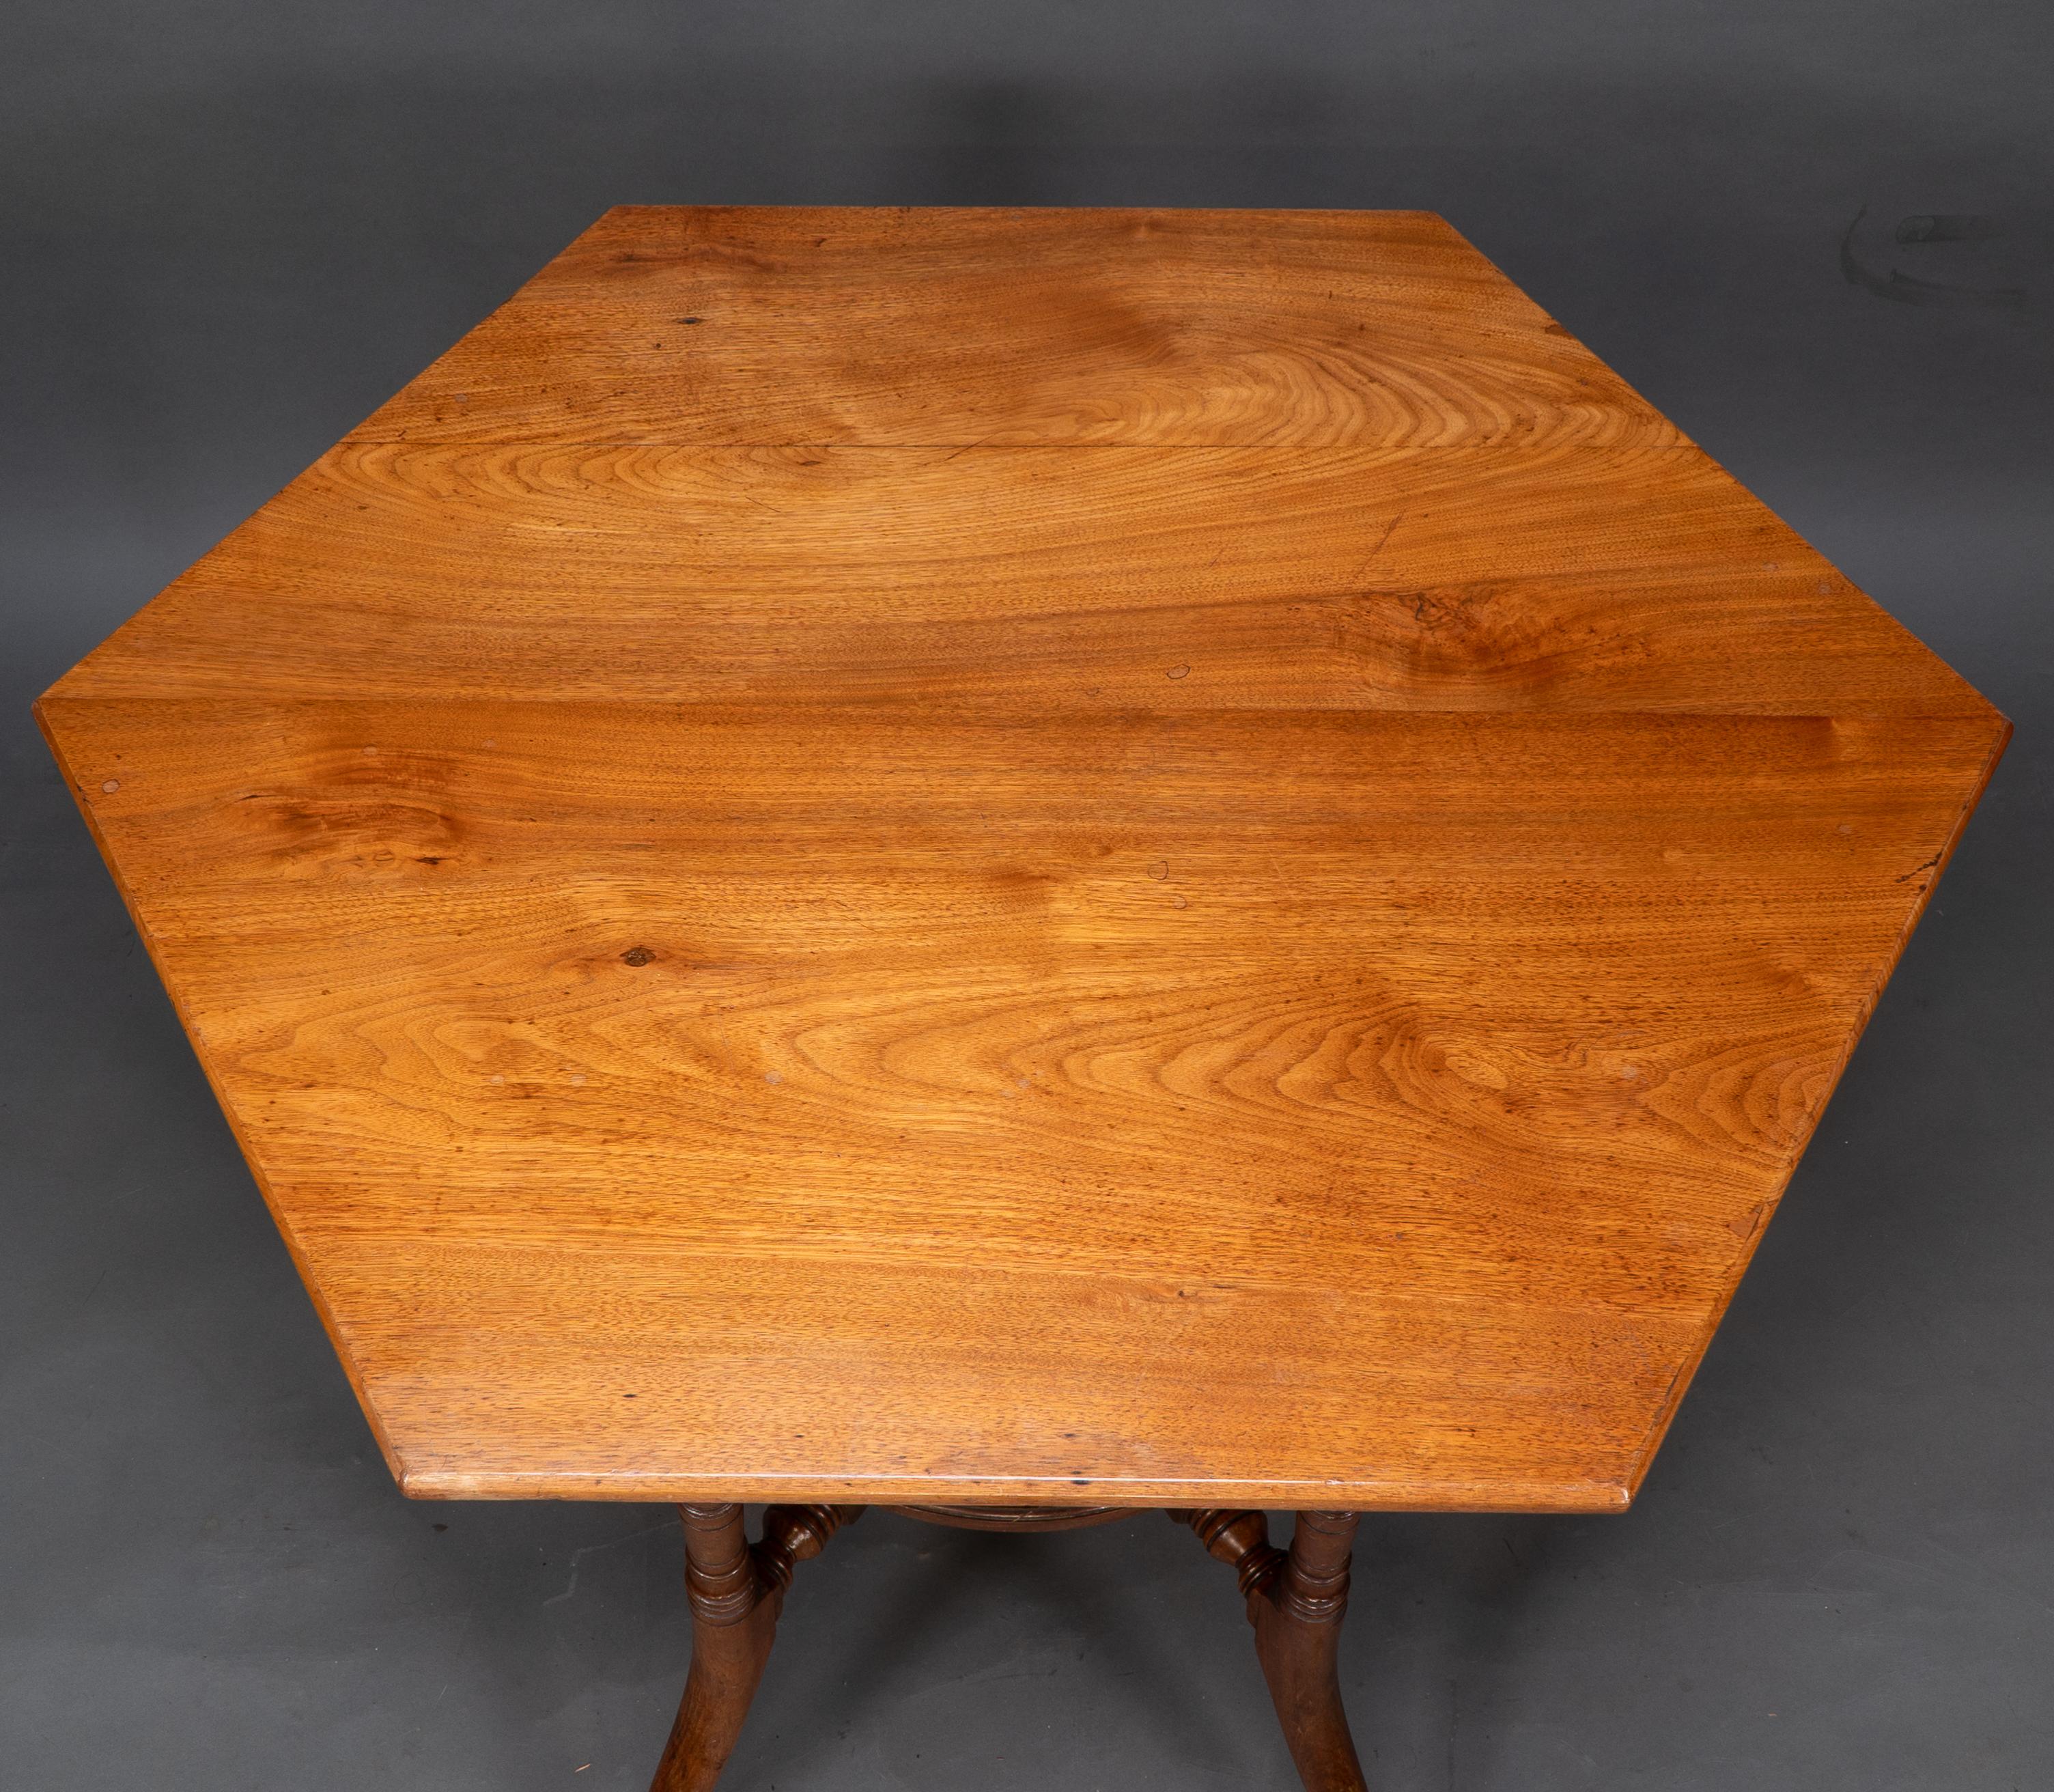 Walnut Collinson & Lock attributed. An Aesthetic Movement walnut octagonal center table For Sale